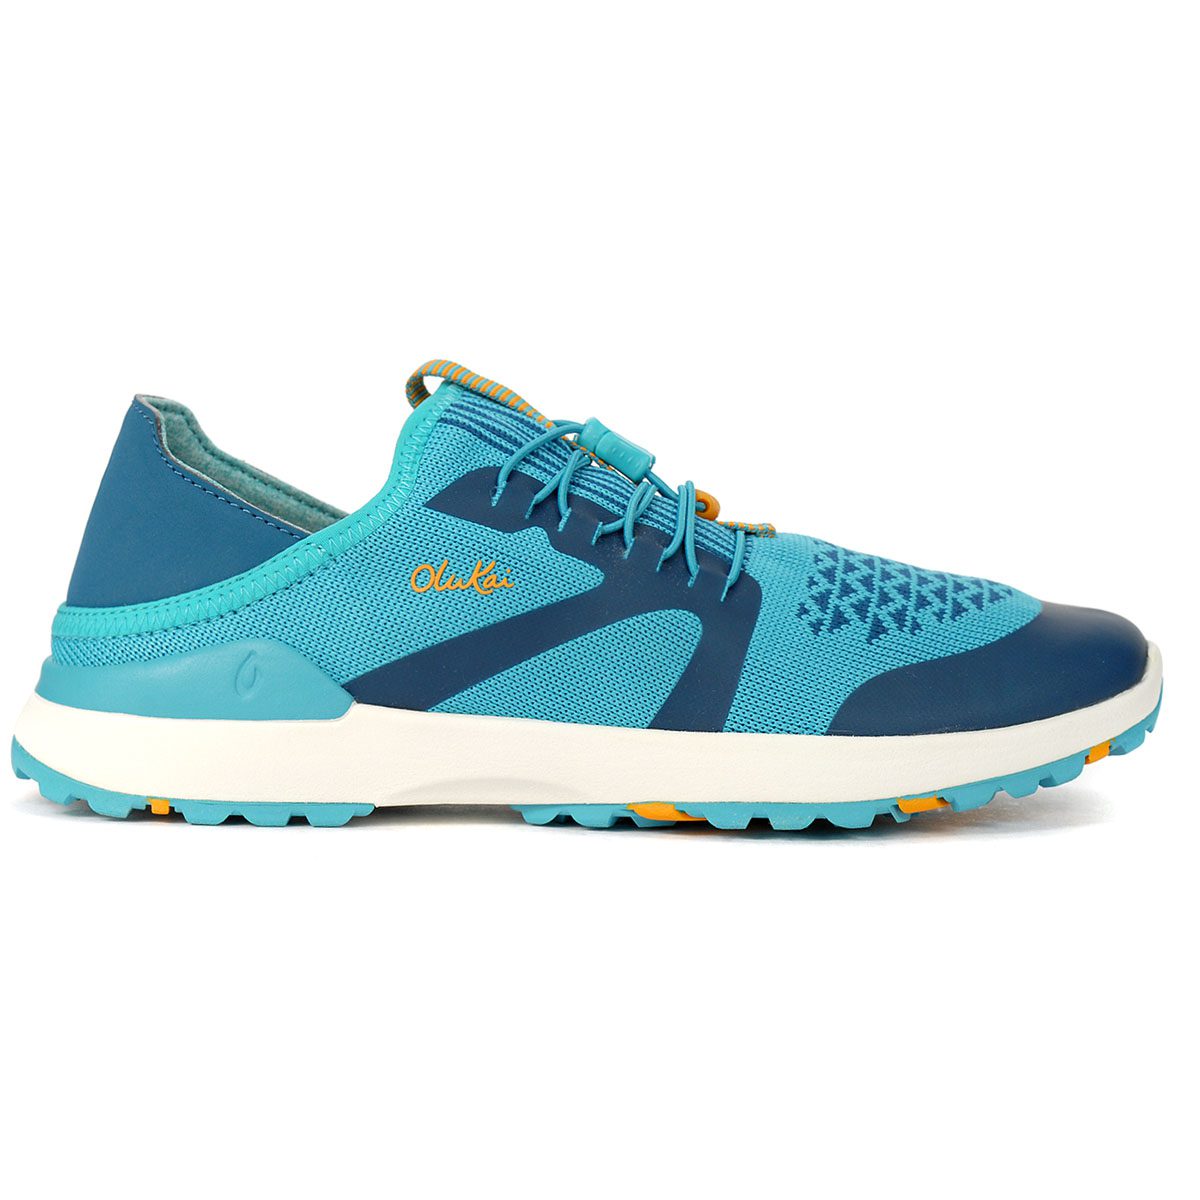 OluKai Women's Miki Trainer Tropical Blue/Teal Running Shoes